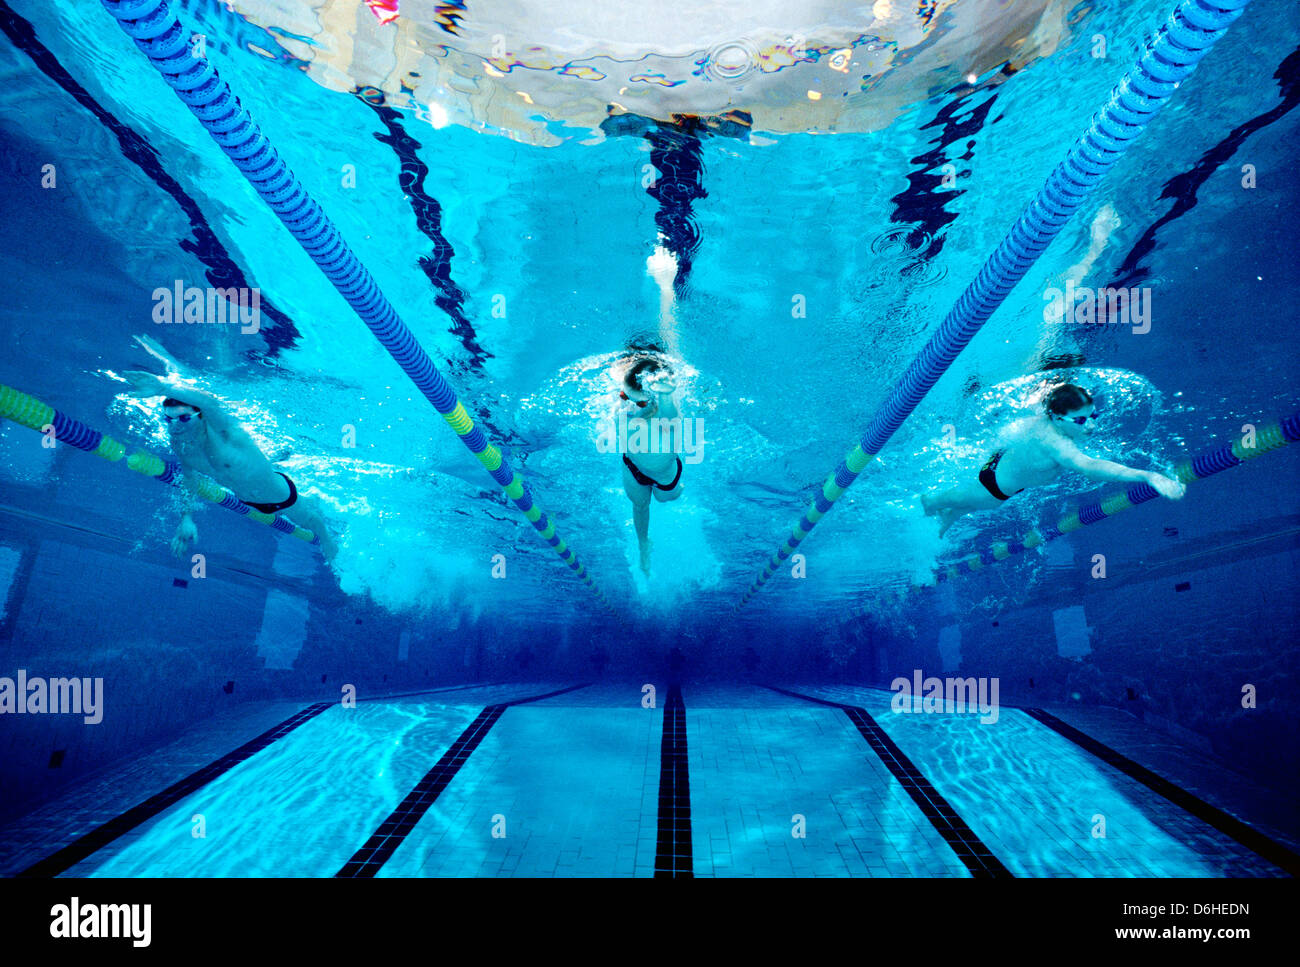 Underwater photograph of a boys high school swim team practicing in an Olympic size swimming pool. Stock Photo